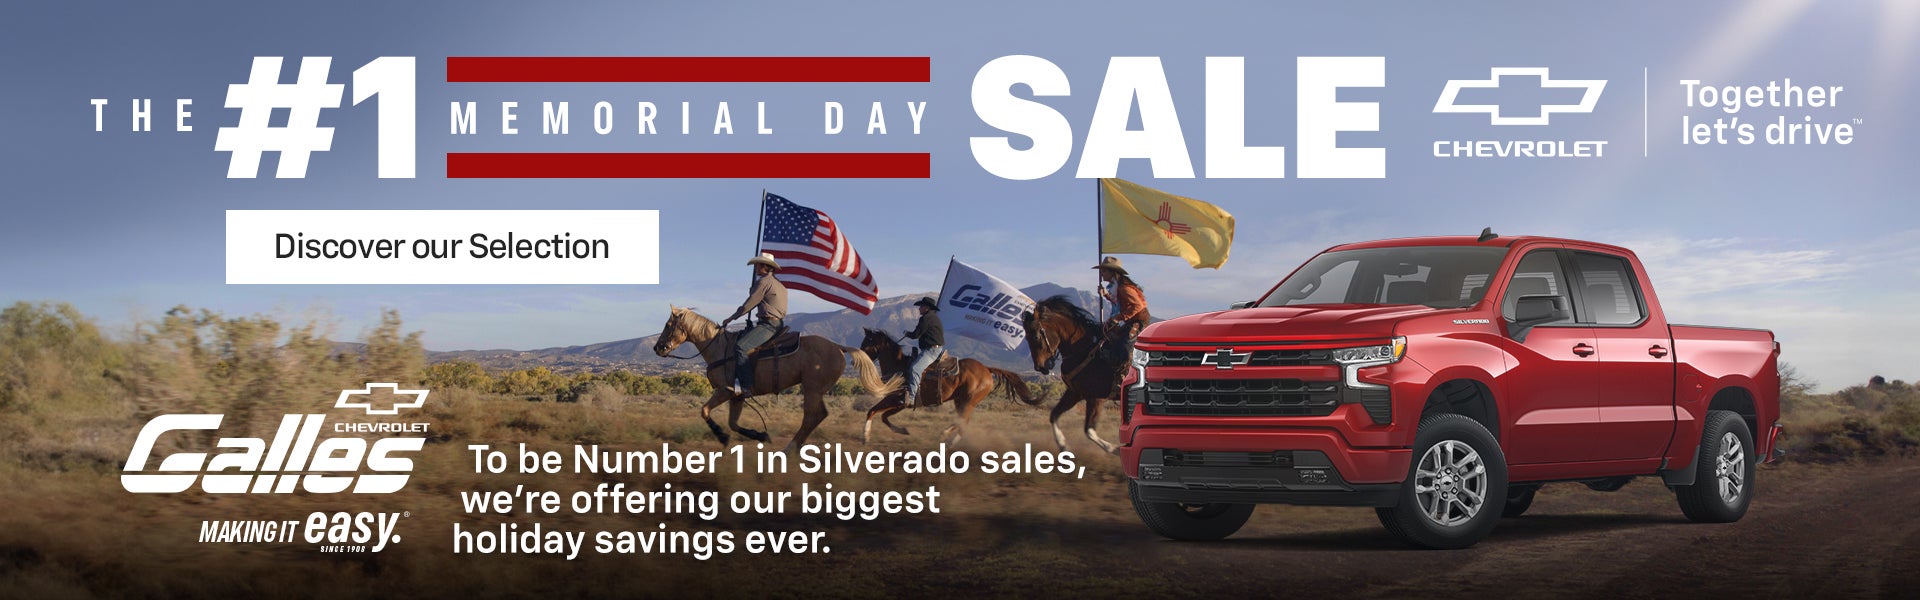 The Number 1 memorial day sale